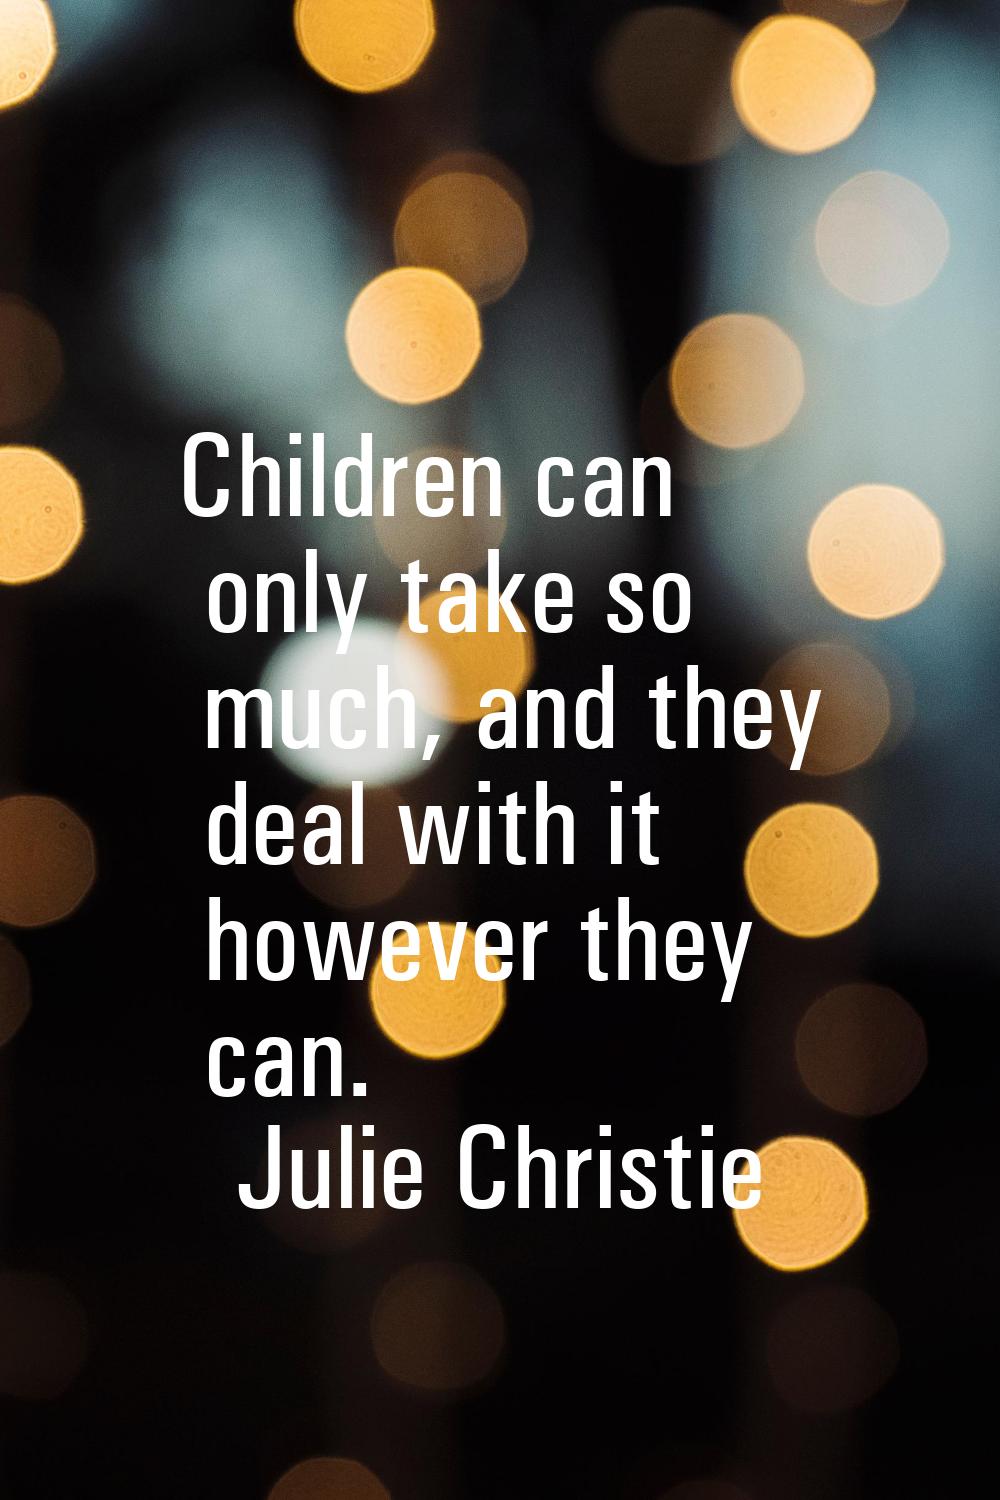 Children can only take so much, and they deal with it however they can.